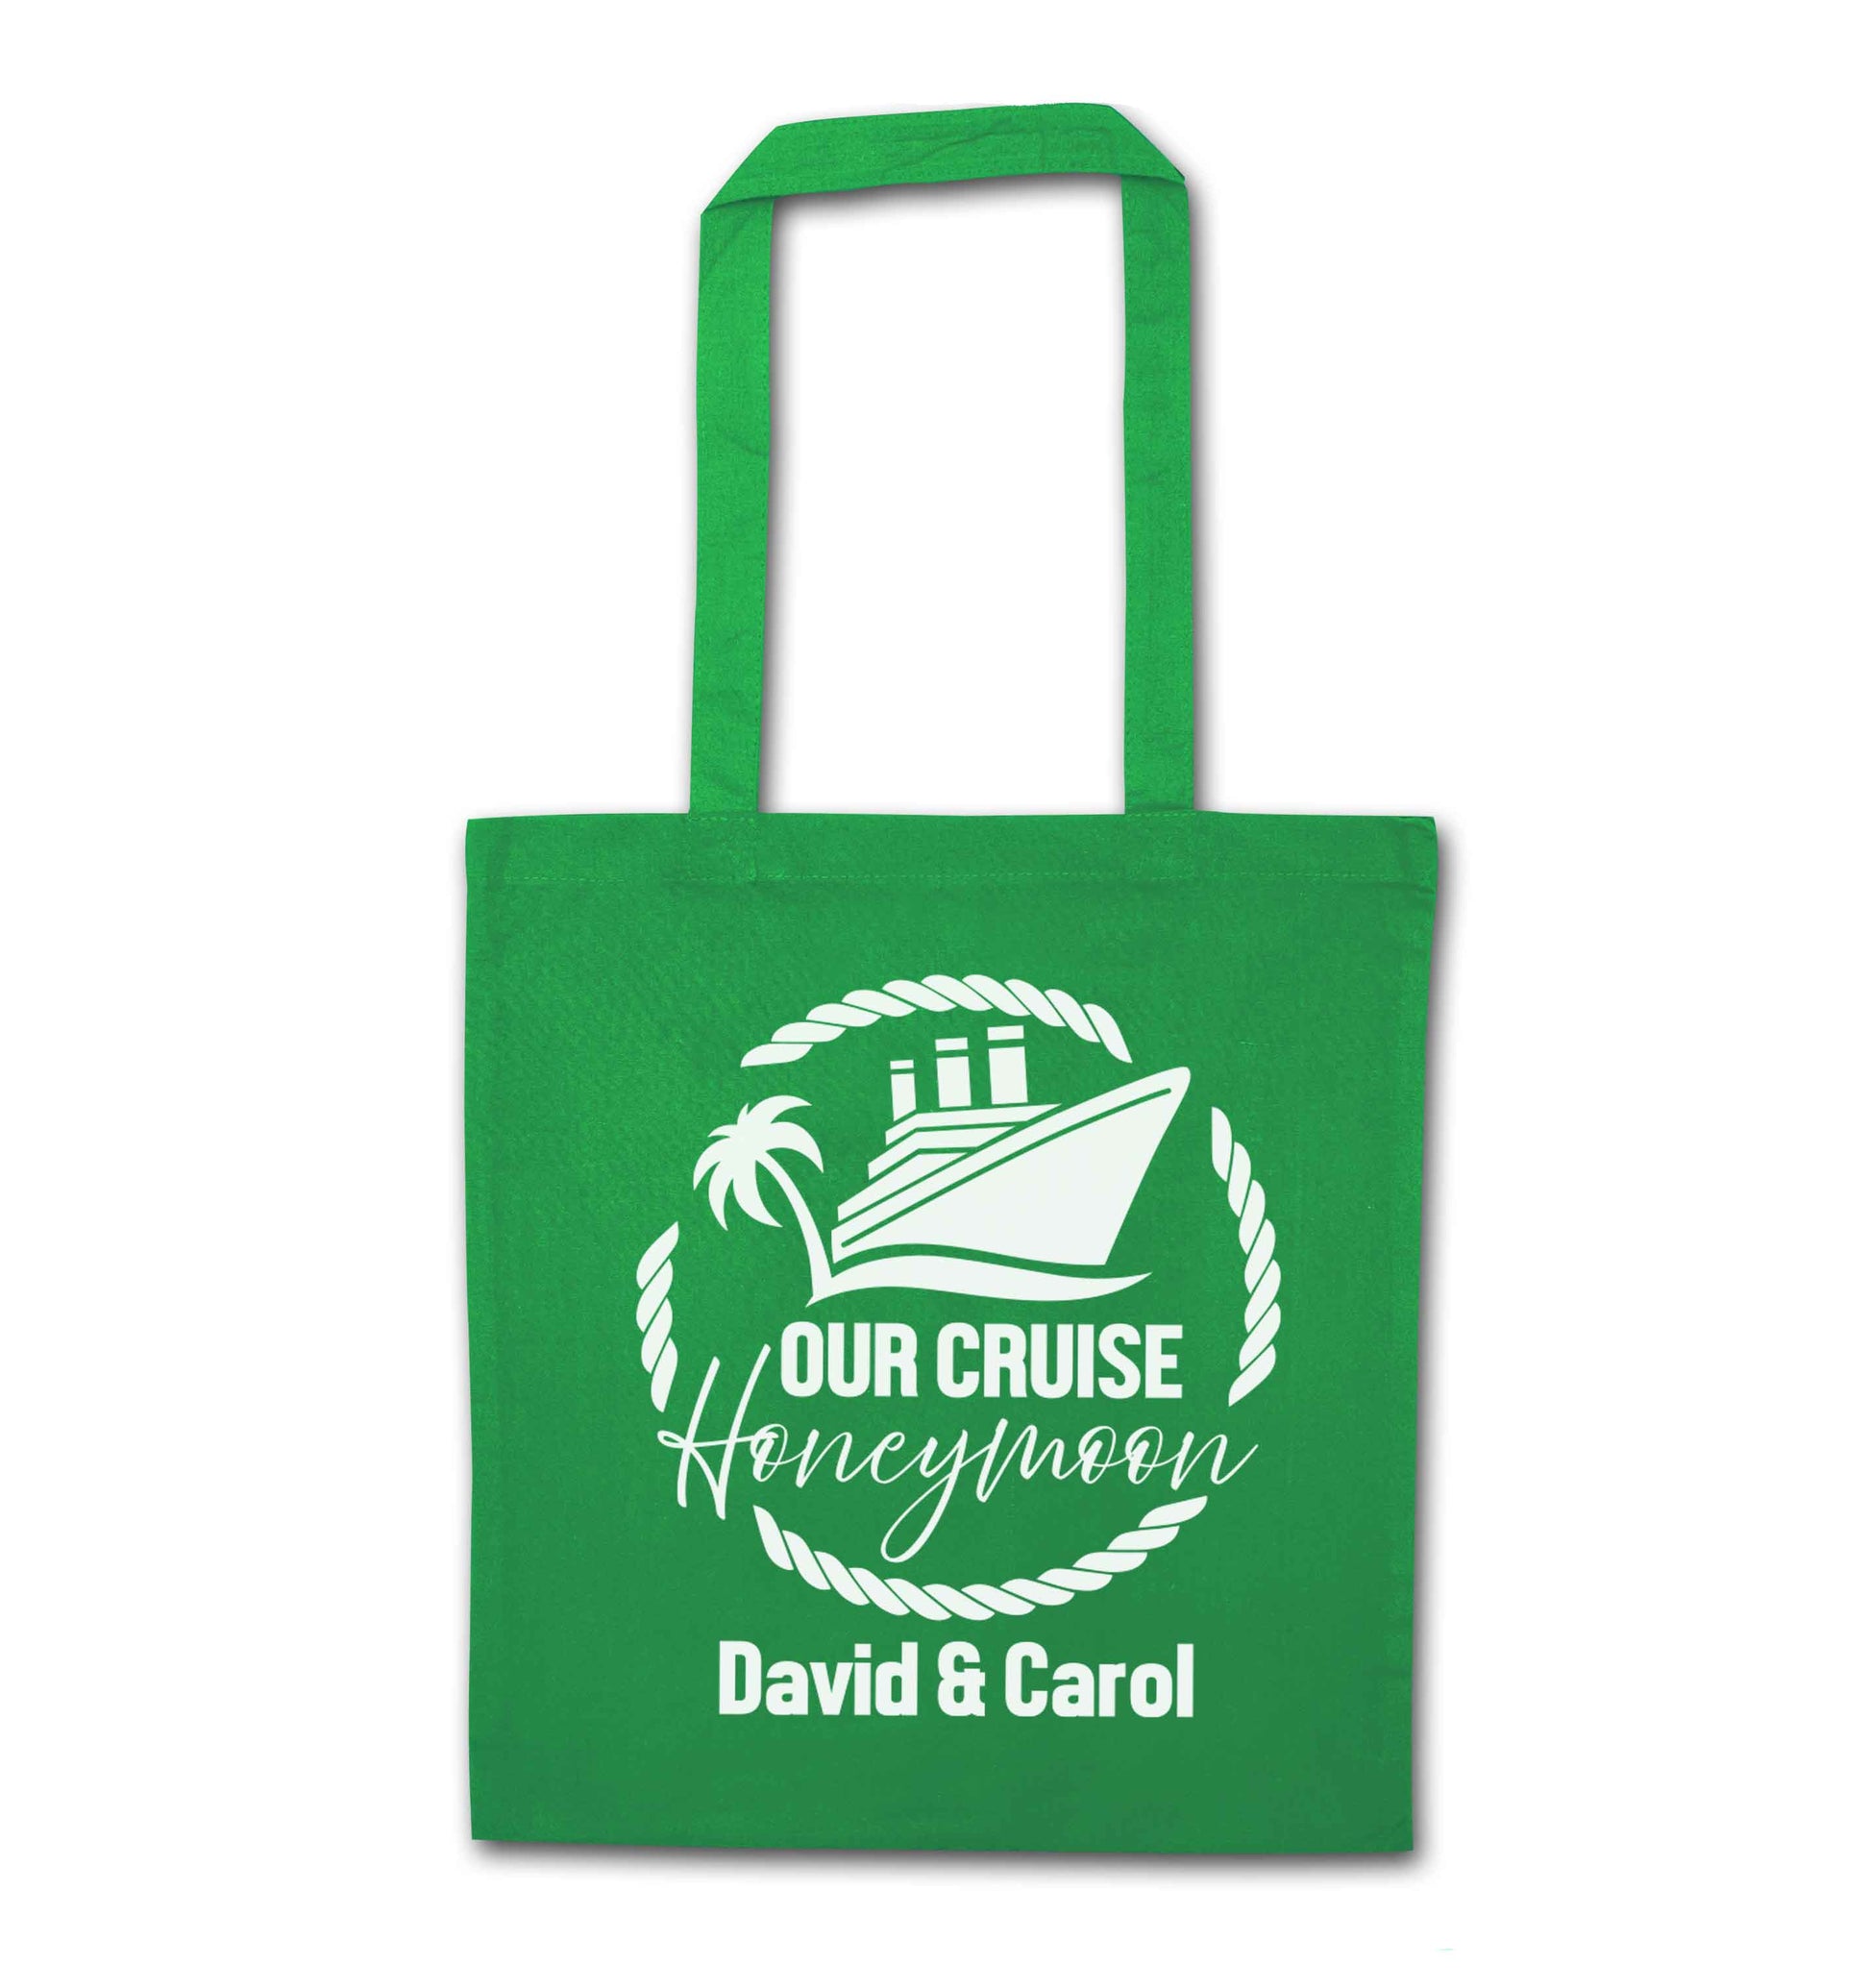 Our cruise honeymoon personalised green tote bag